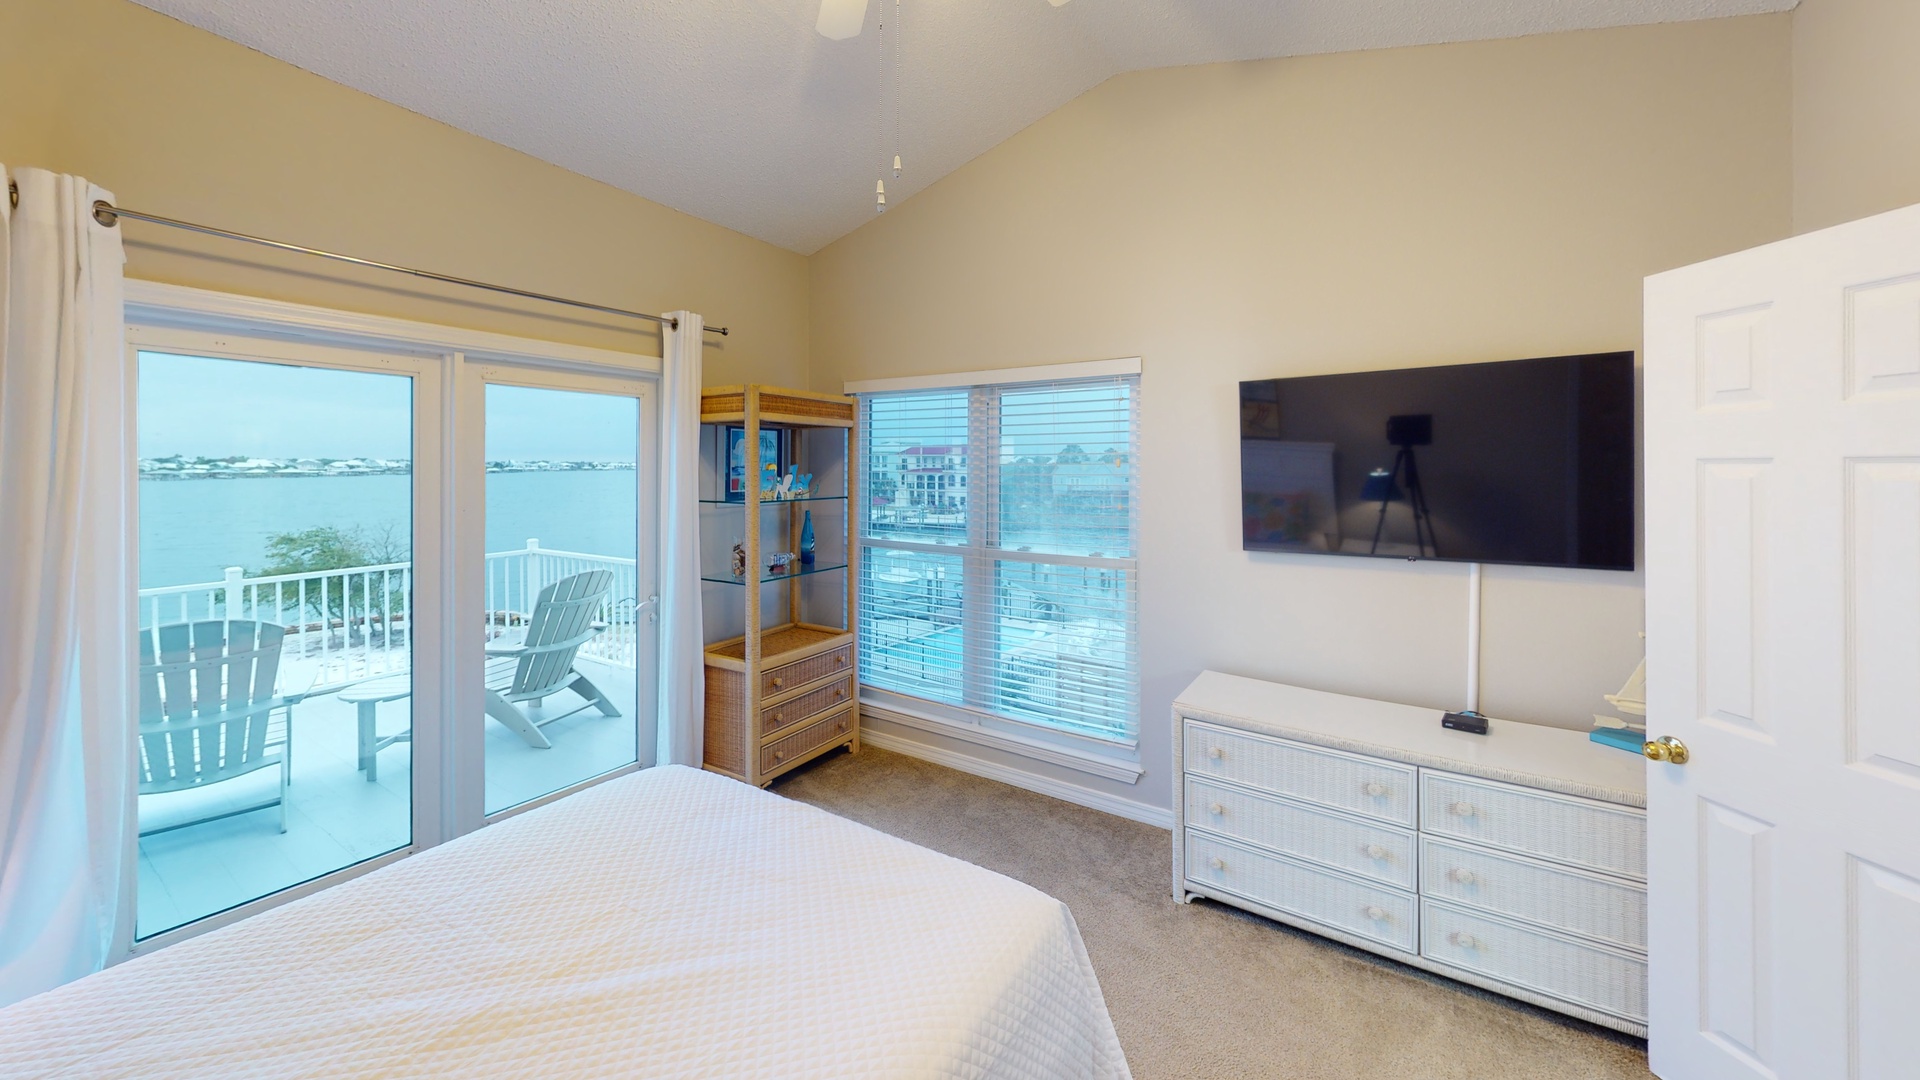 Bedroom 2 features a TV, water views and private balcony access